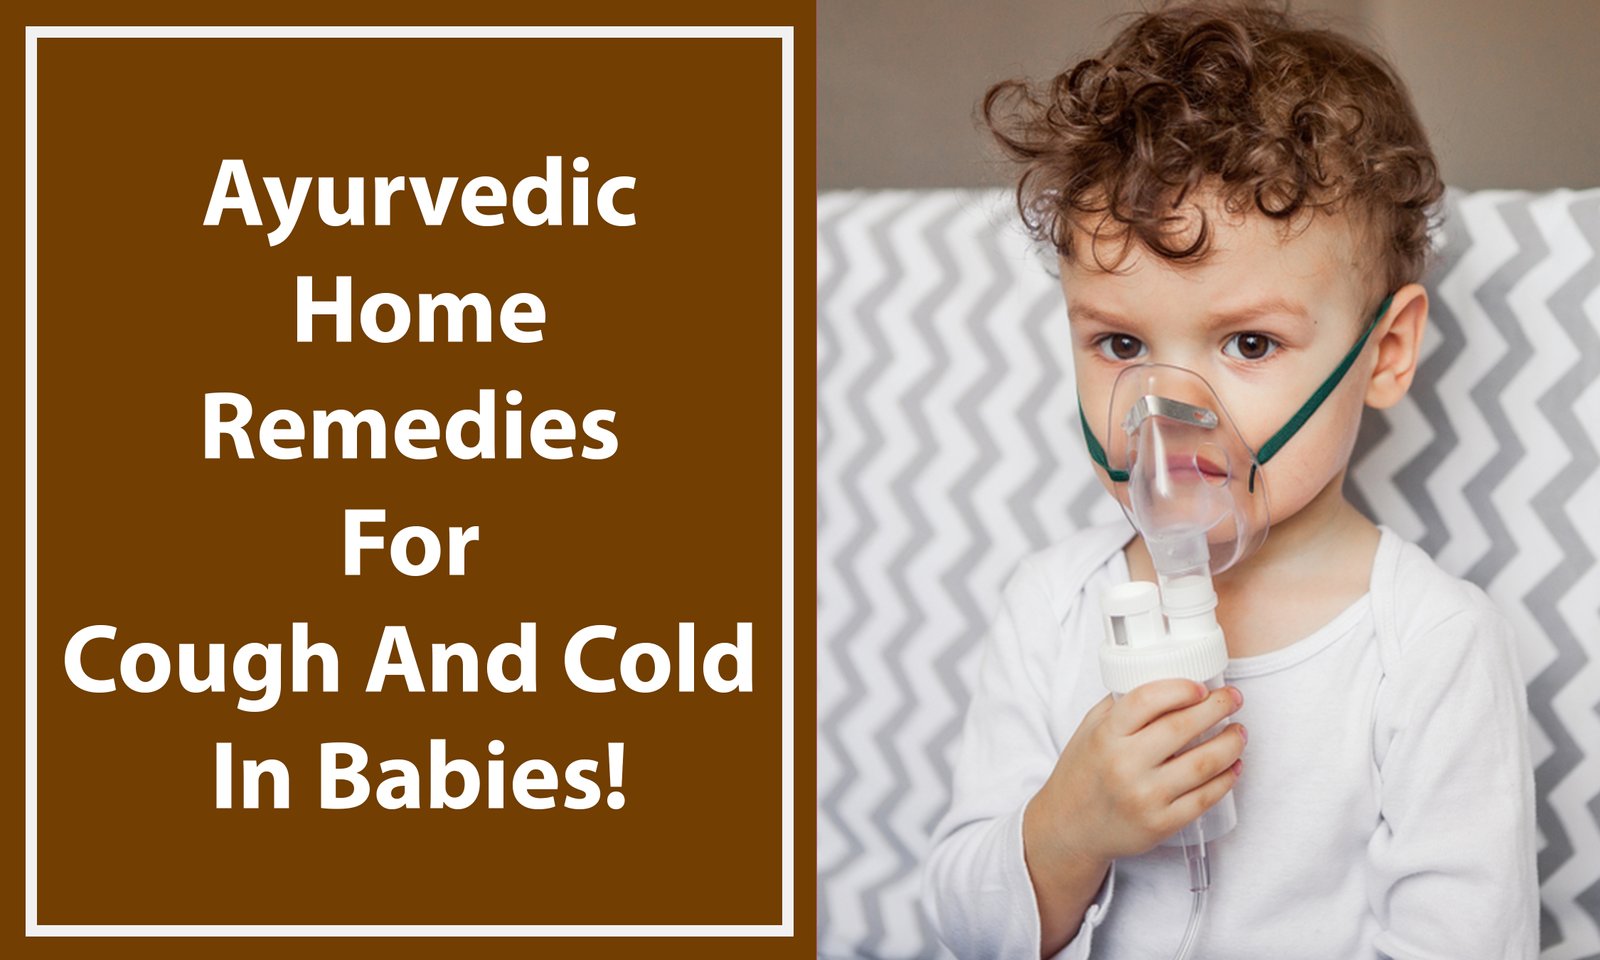 Ayurvedic home remedies for cough and cold in babies